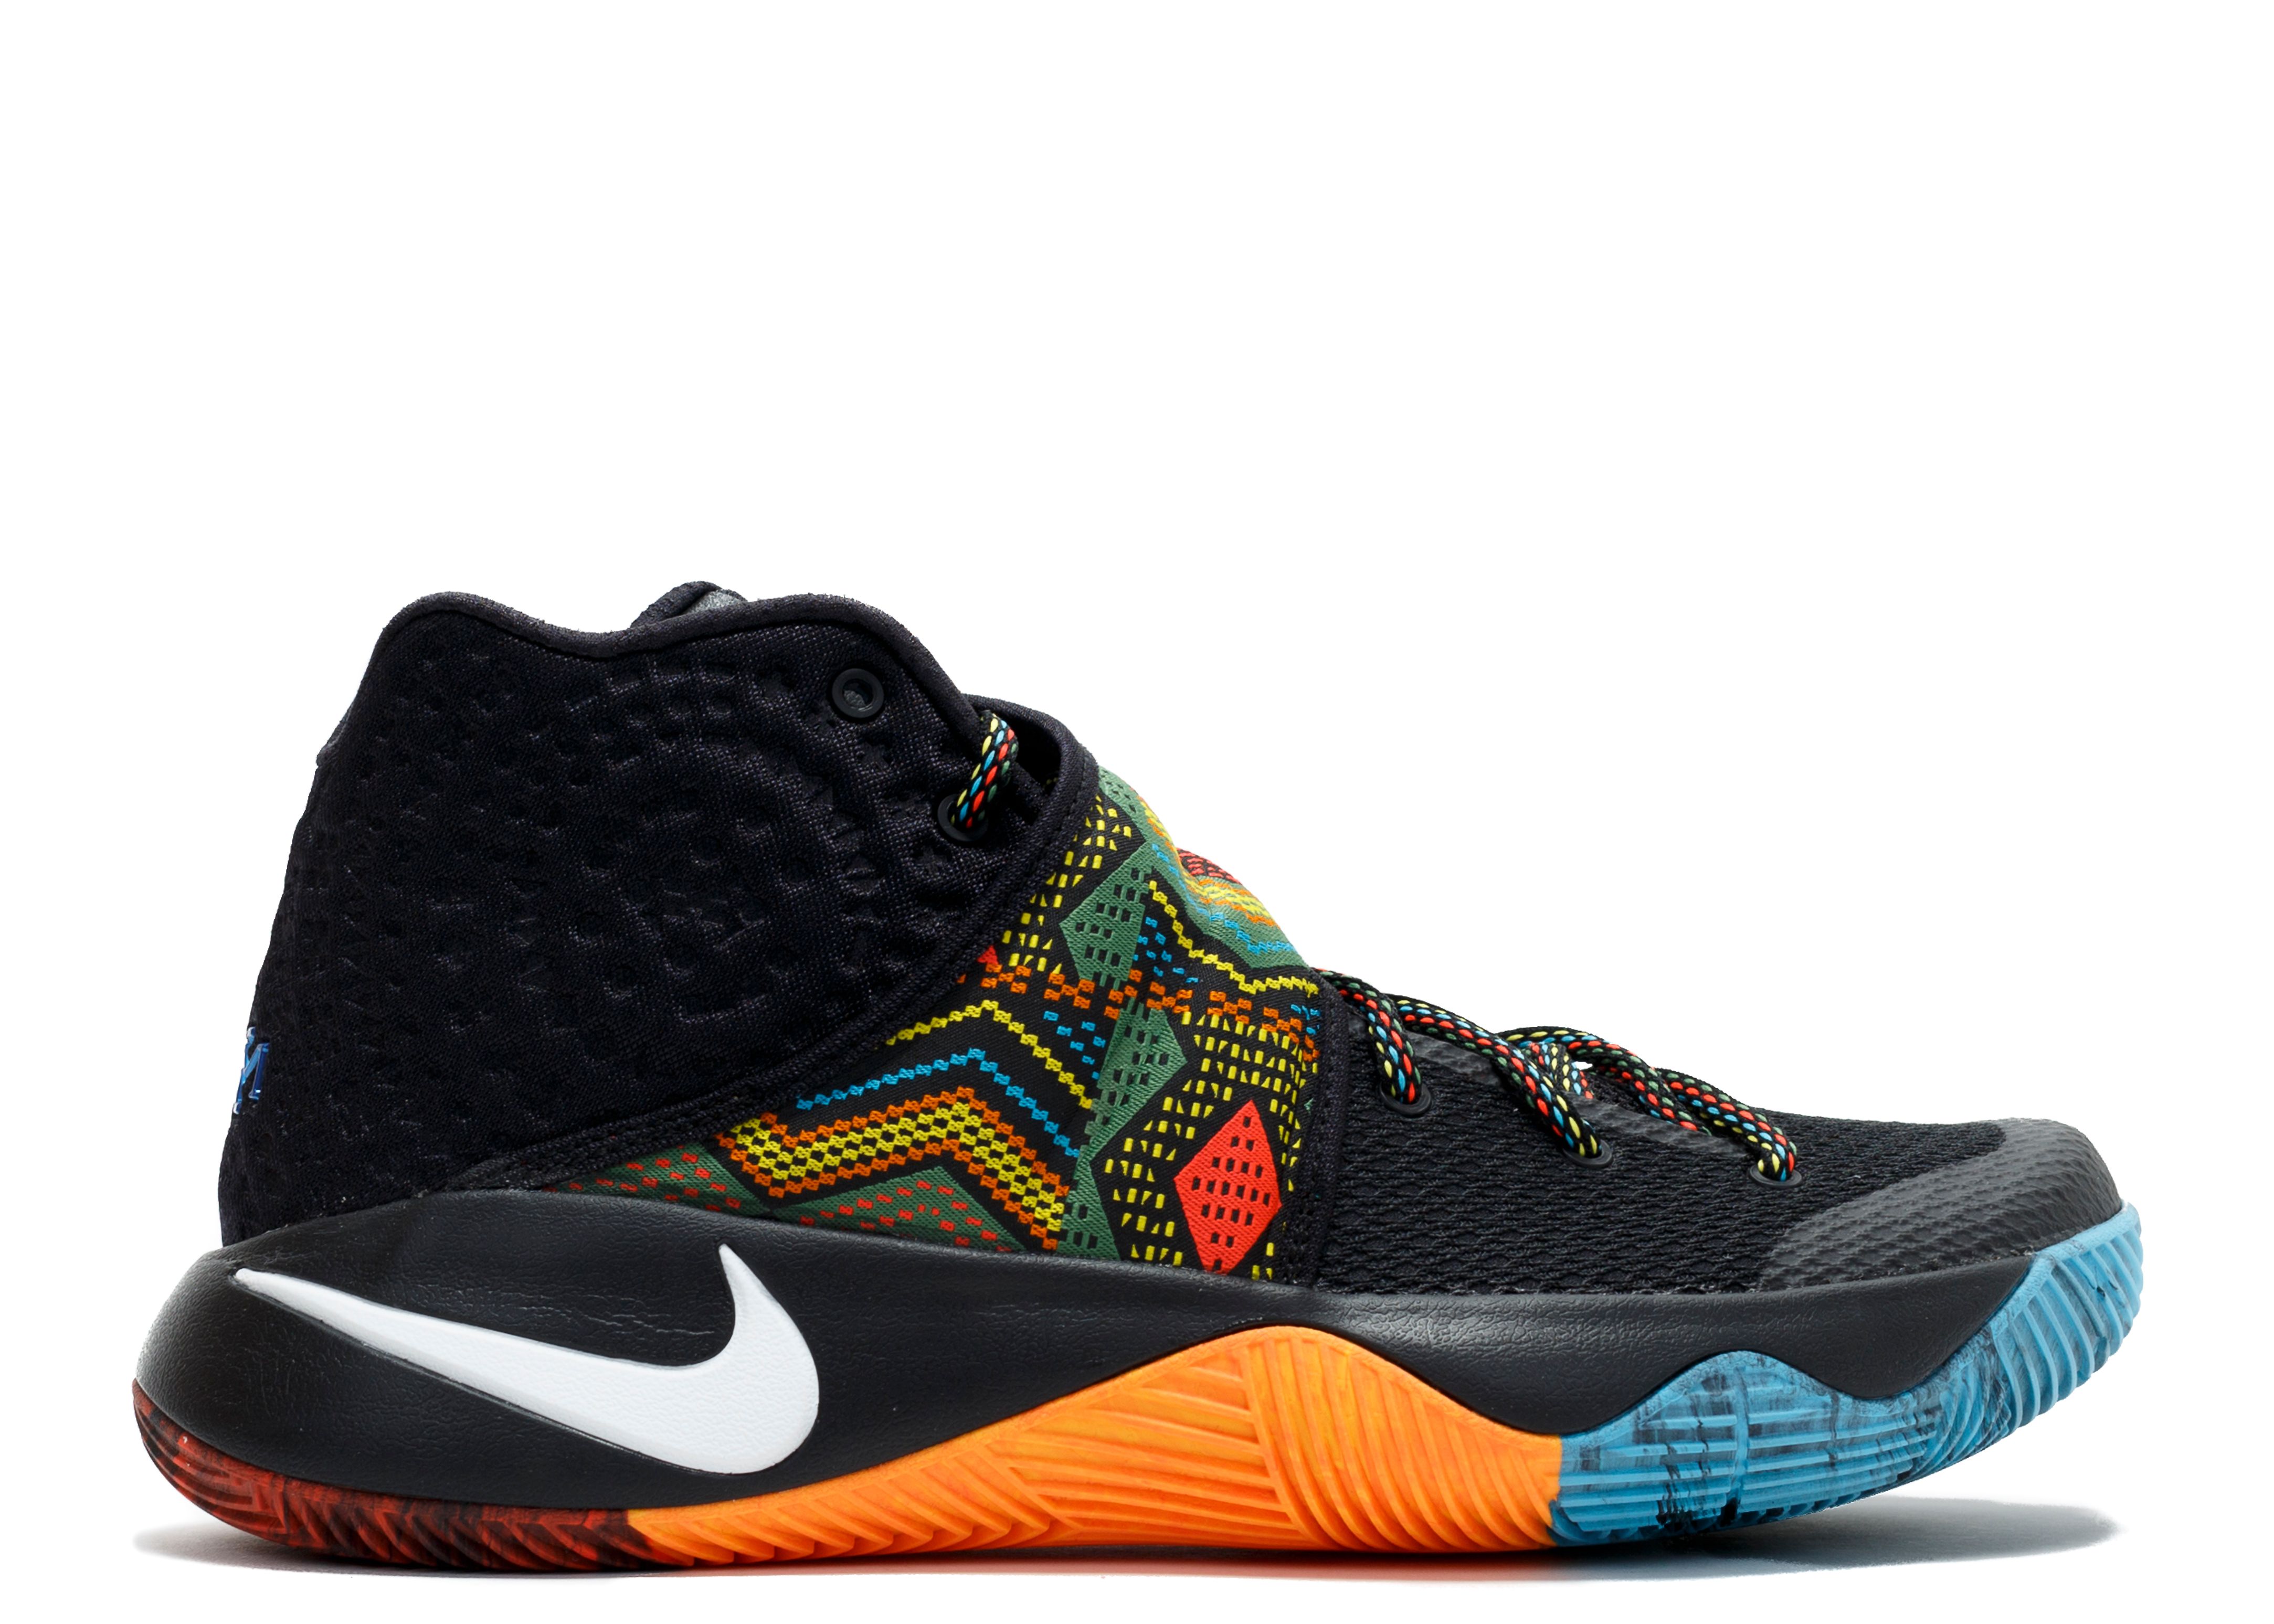 kyrie irving black history month shoes